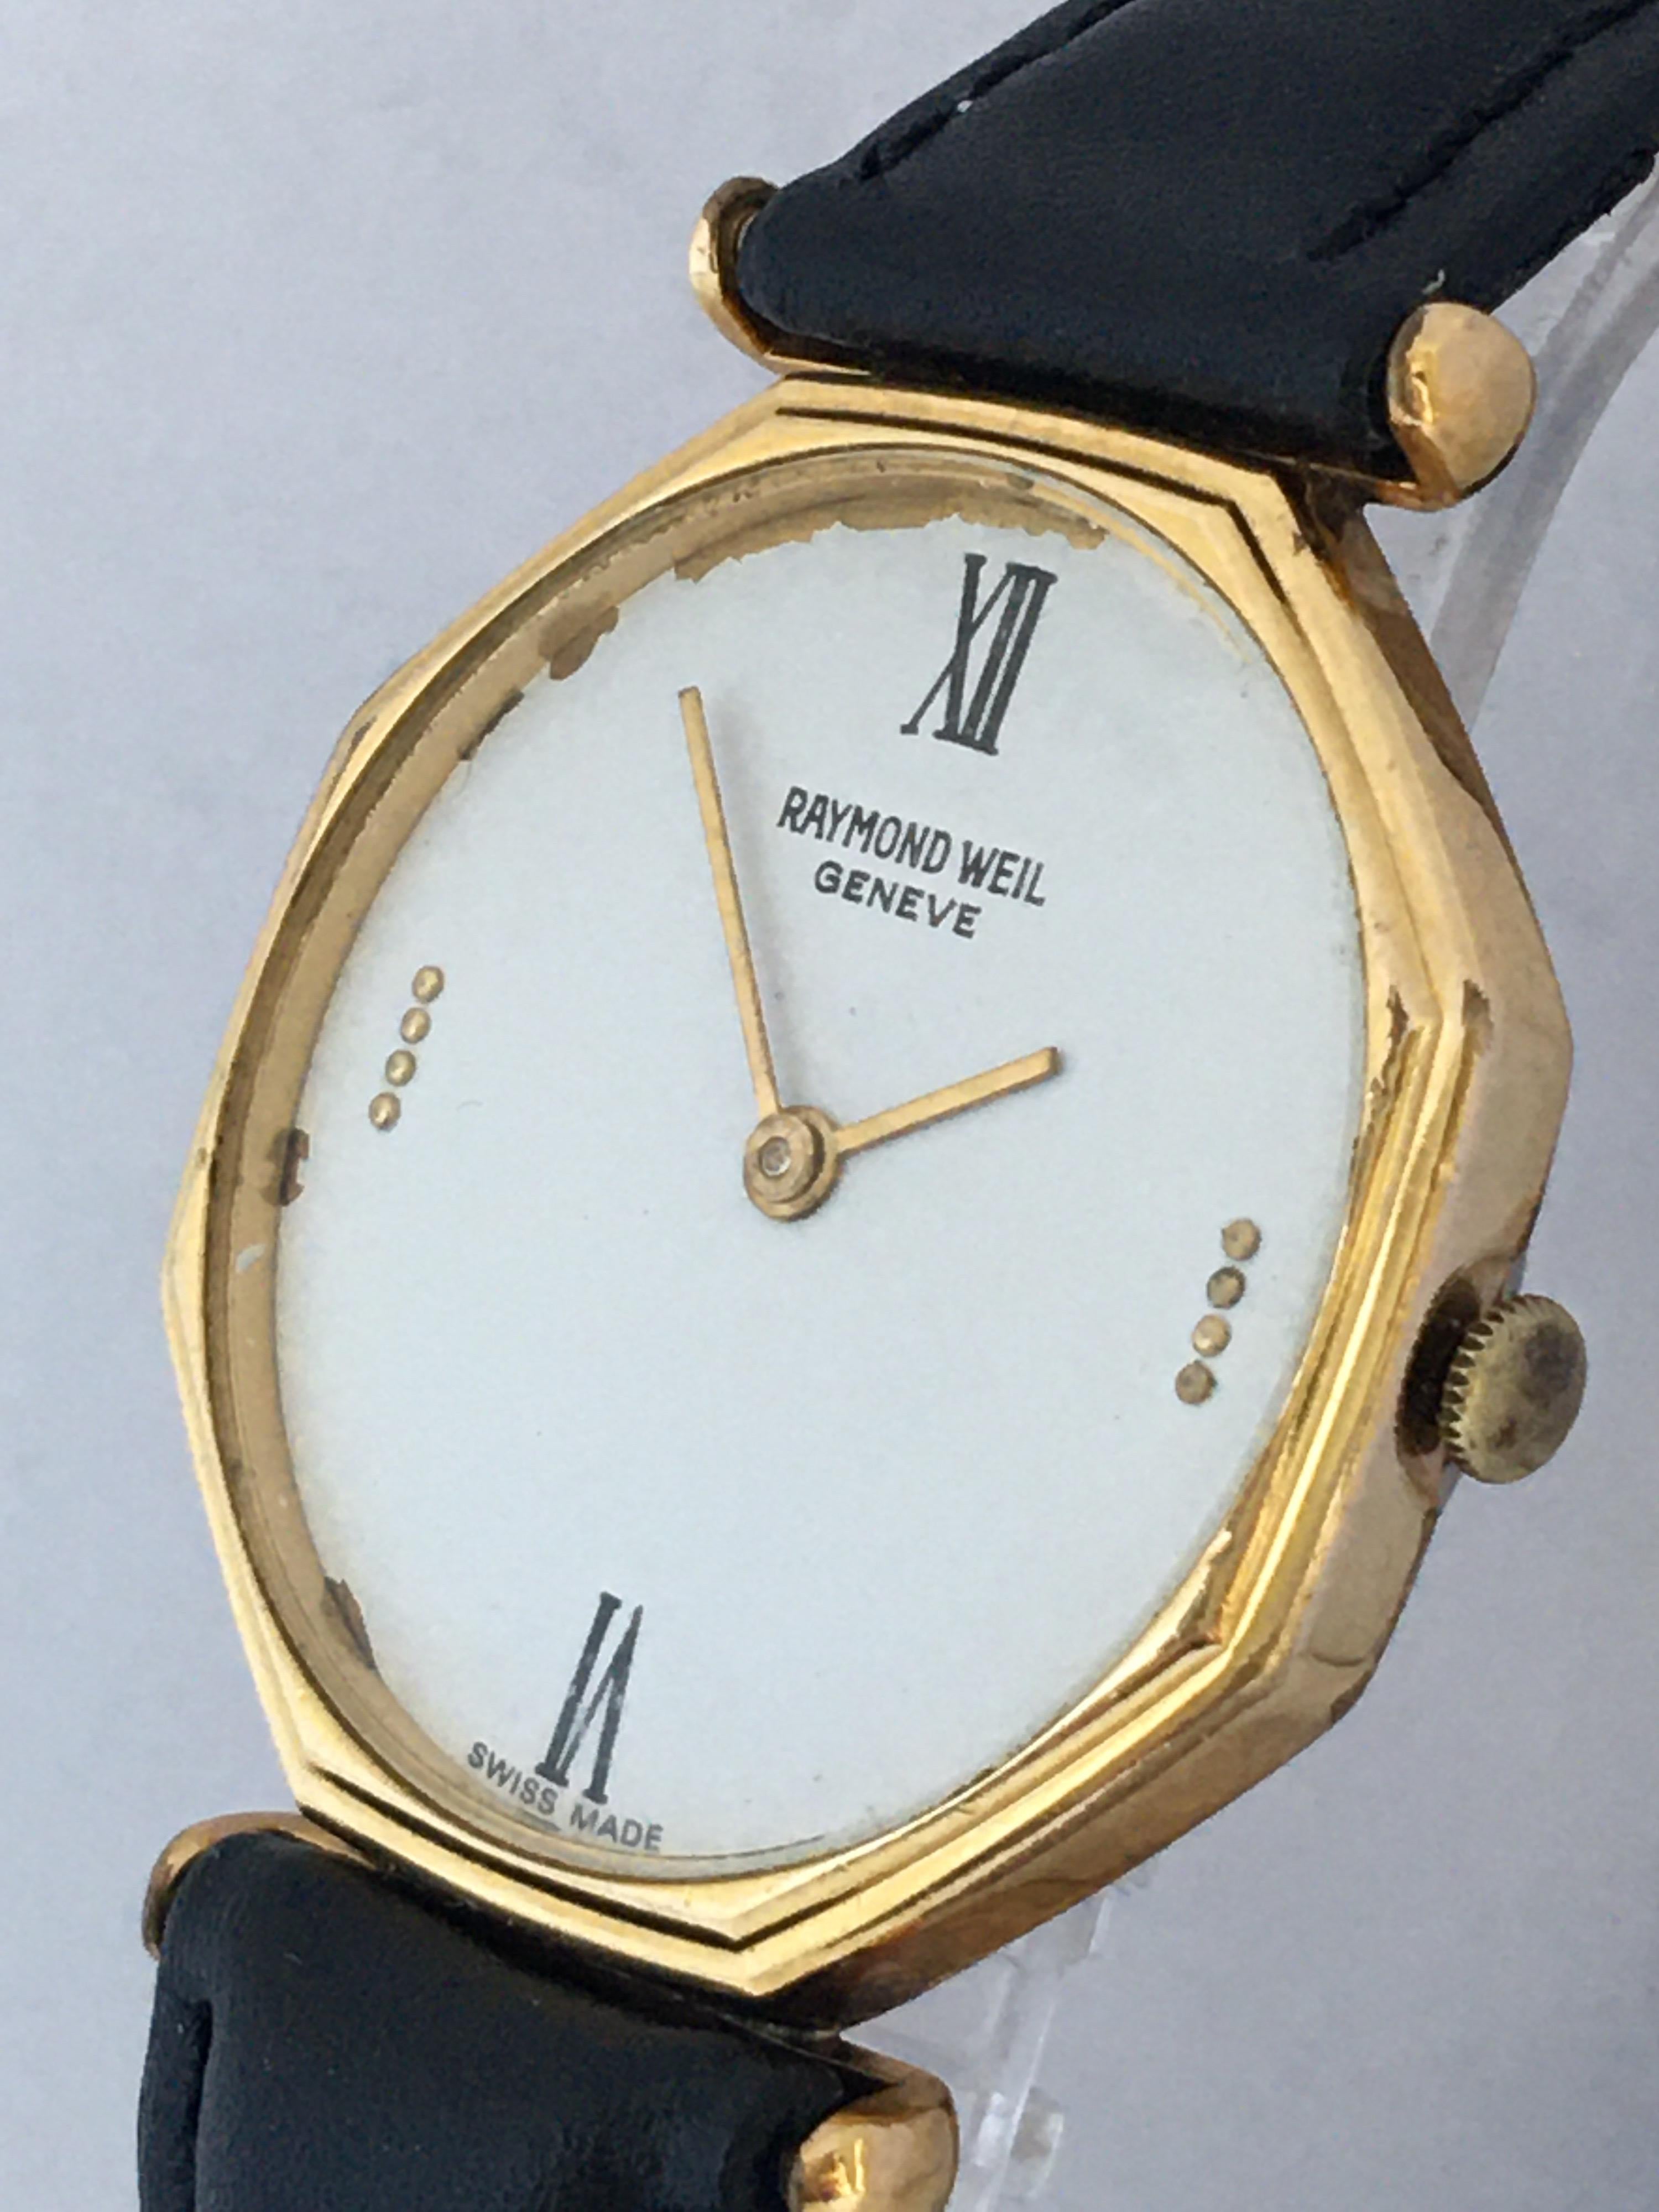 Vintage 1980s Gold-Plated and Stainless Steel Hand-Winding Raymond Weil Geneve 4